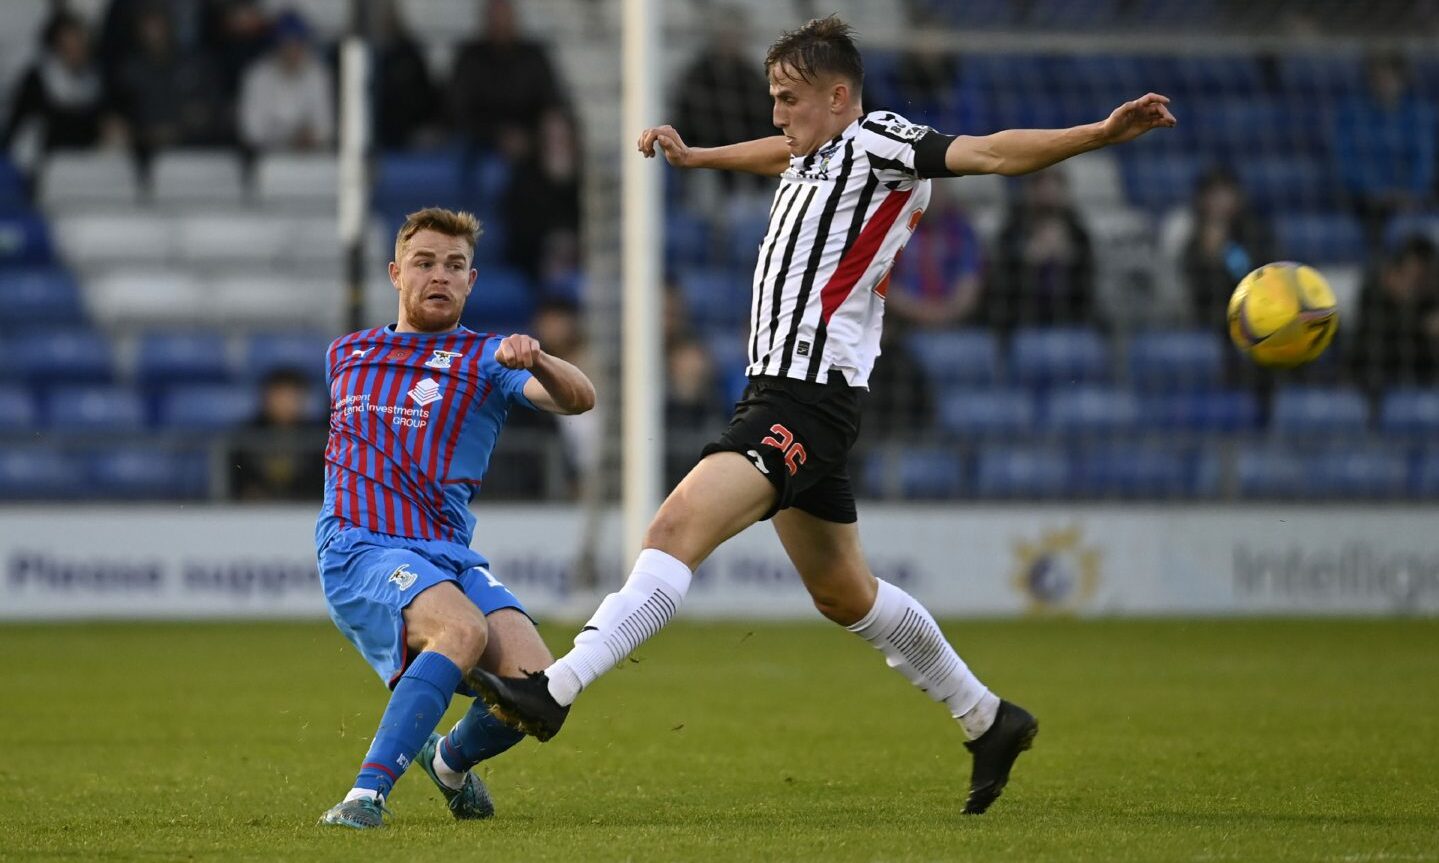 Dunfermline's Matty Todd and Inverness' Lewis Jamieson in the thick of the action.